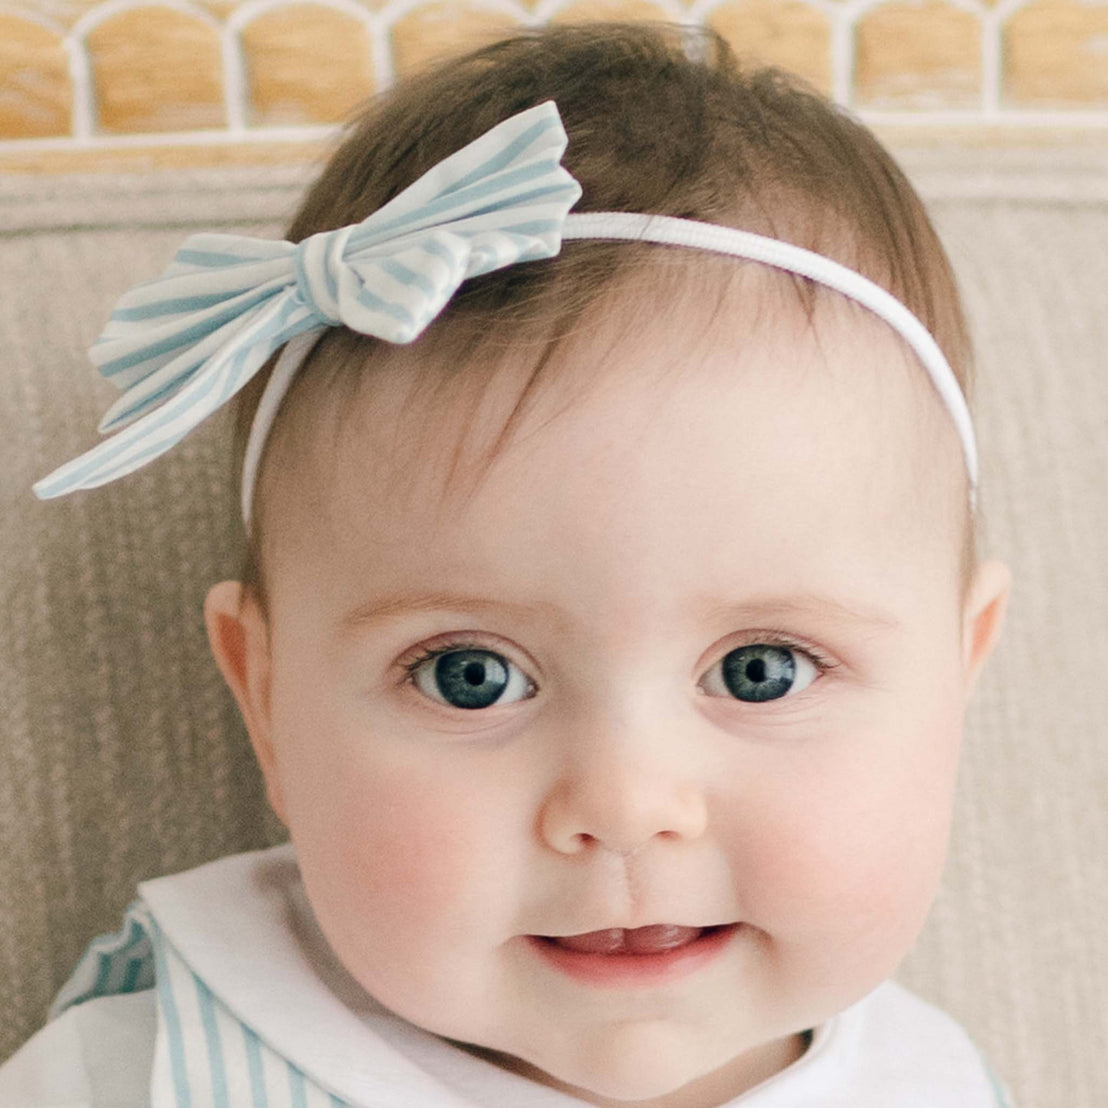 A close-up of a baby with bright blue eyes and a small smile, wearing the blue Thea Bow Headband against a beige fabric background.